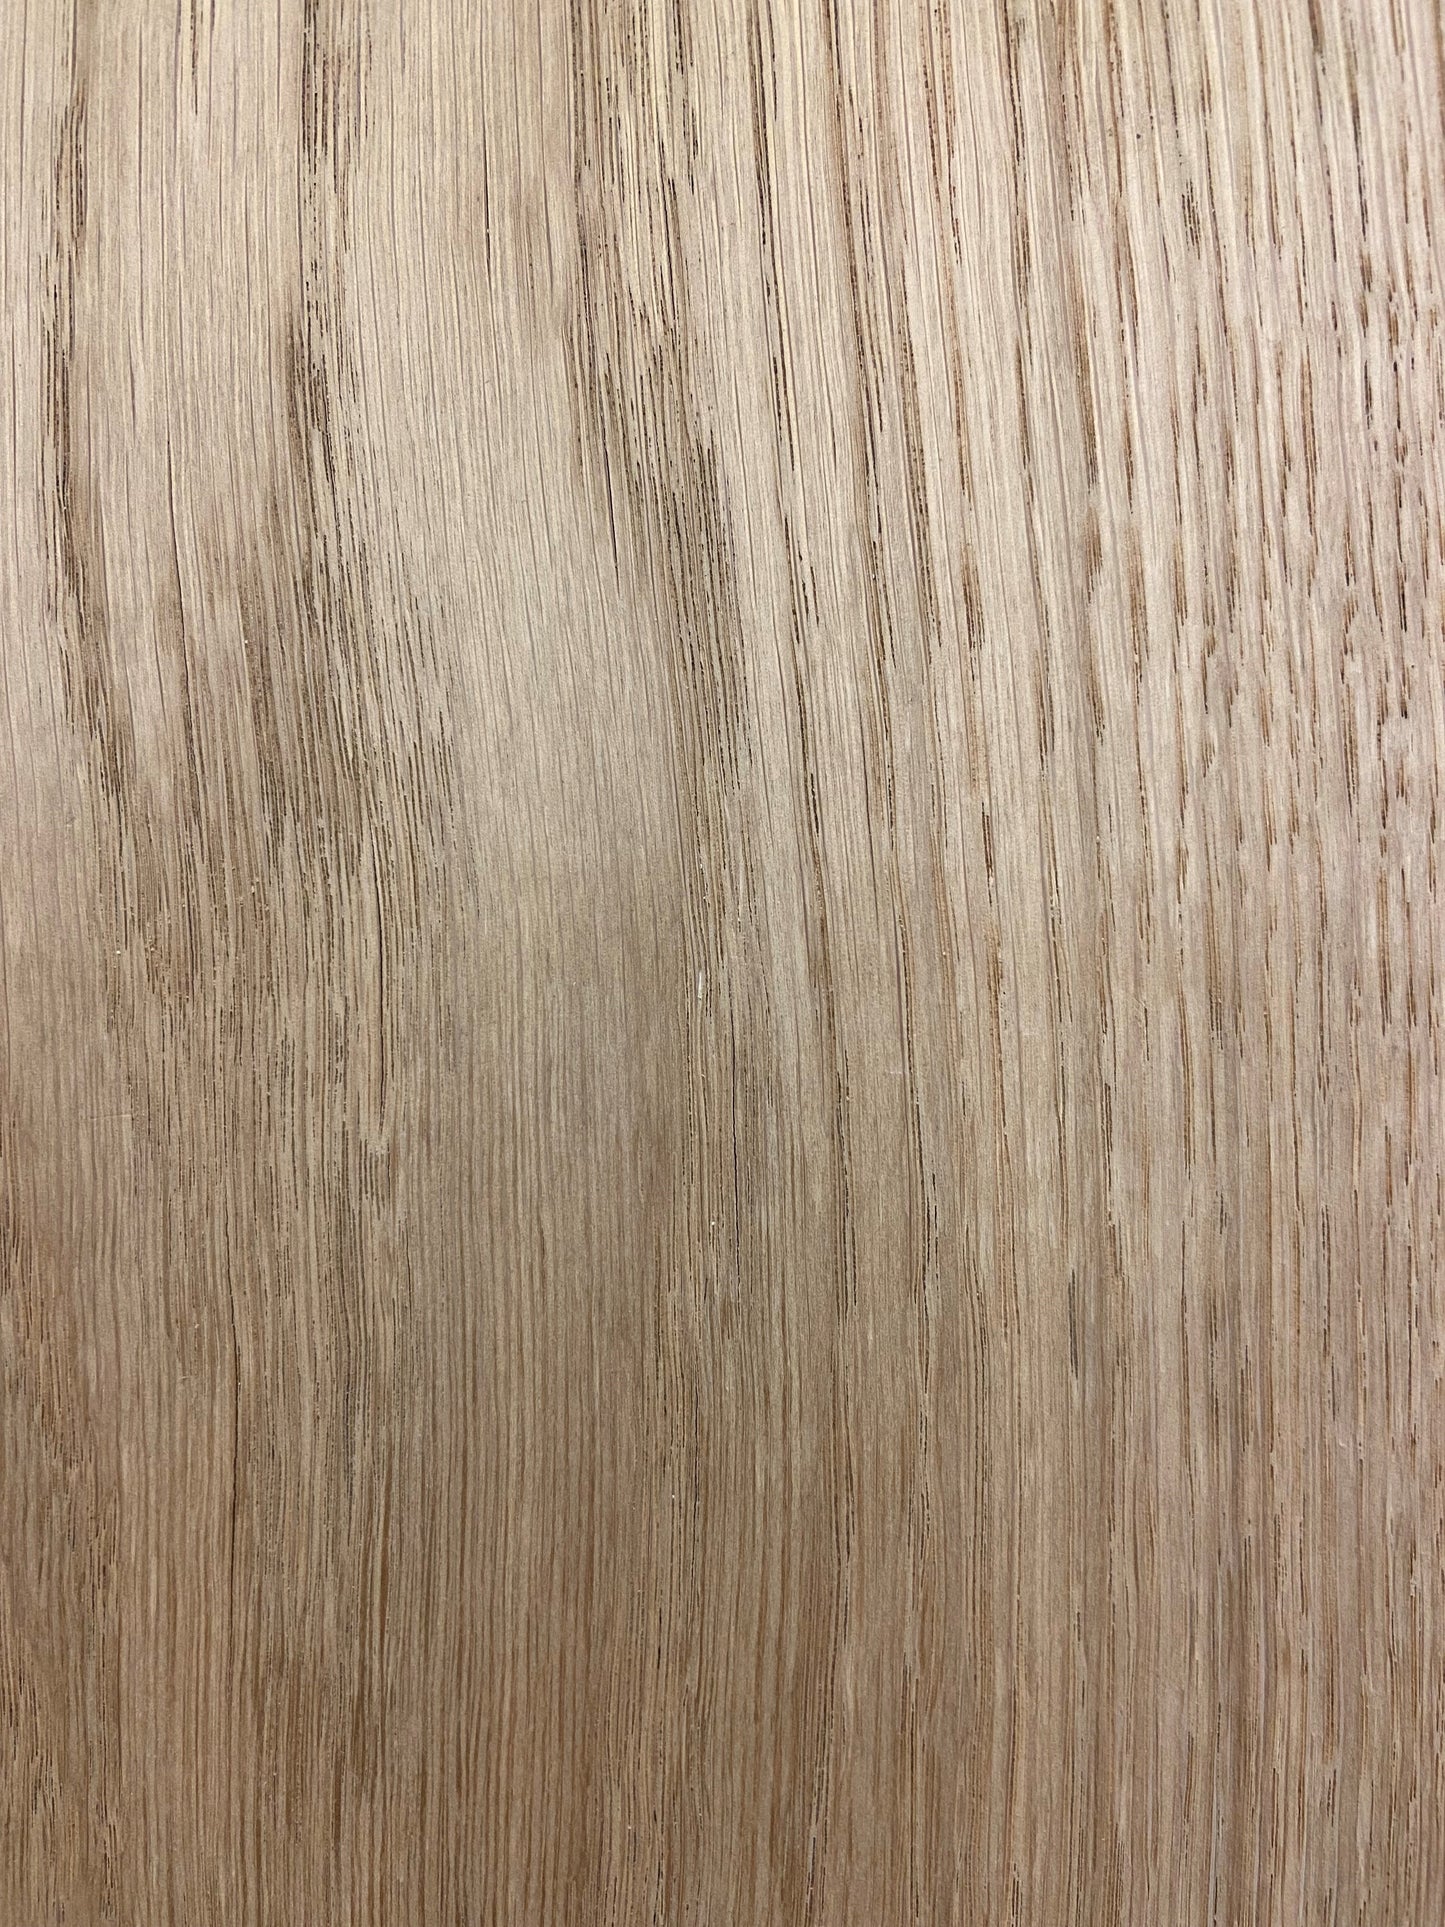 New European White Oak Material Sample Unfinished